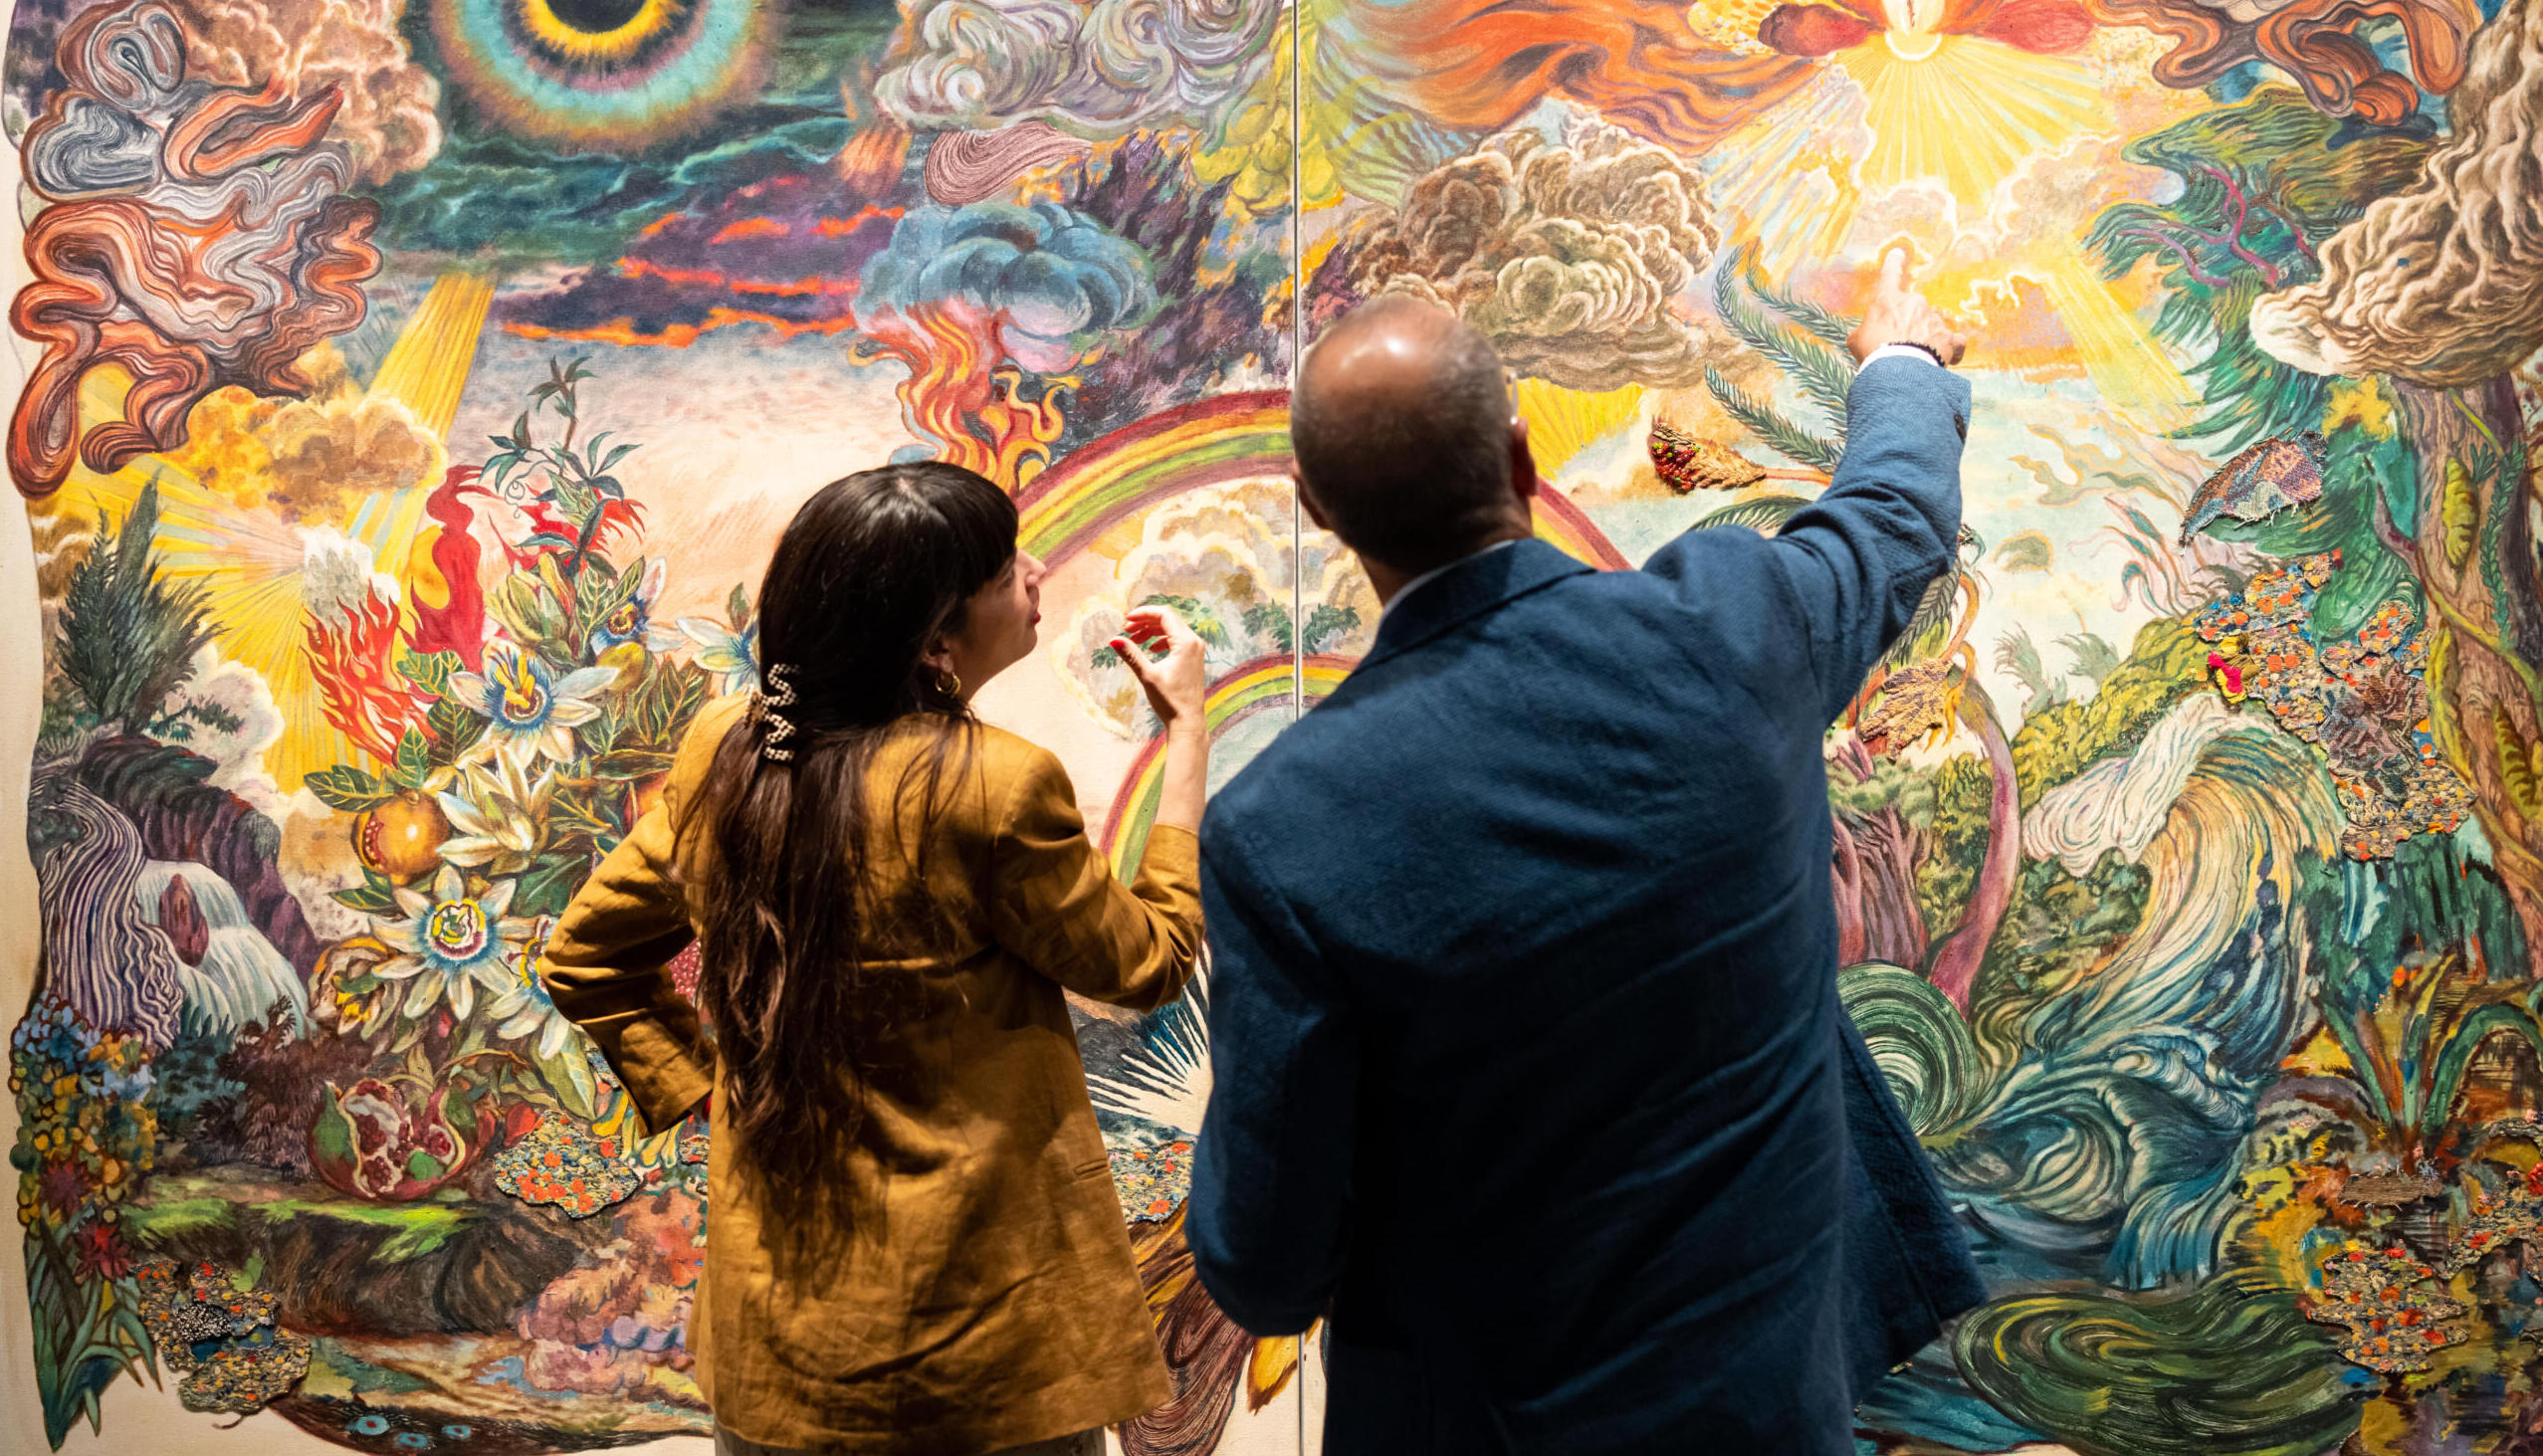 Top international art fair EXPO CHICAGO returns to Navy Pier this spring | Choose Chicago